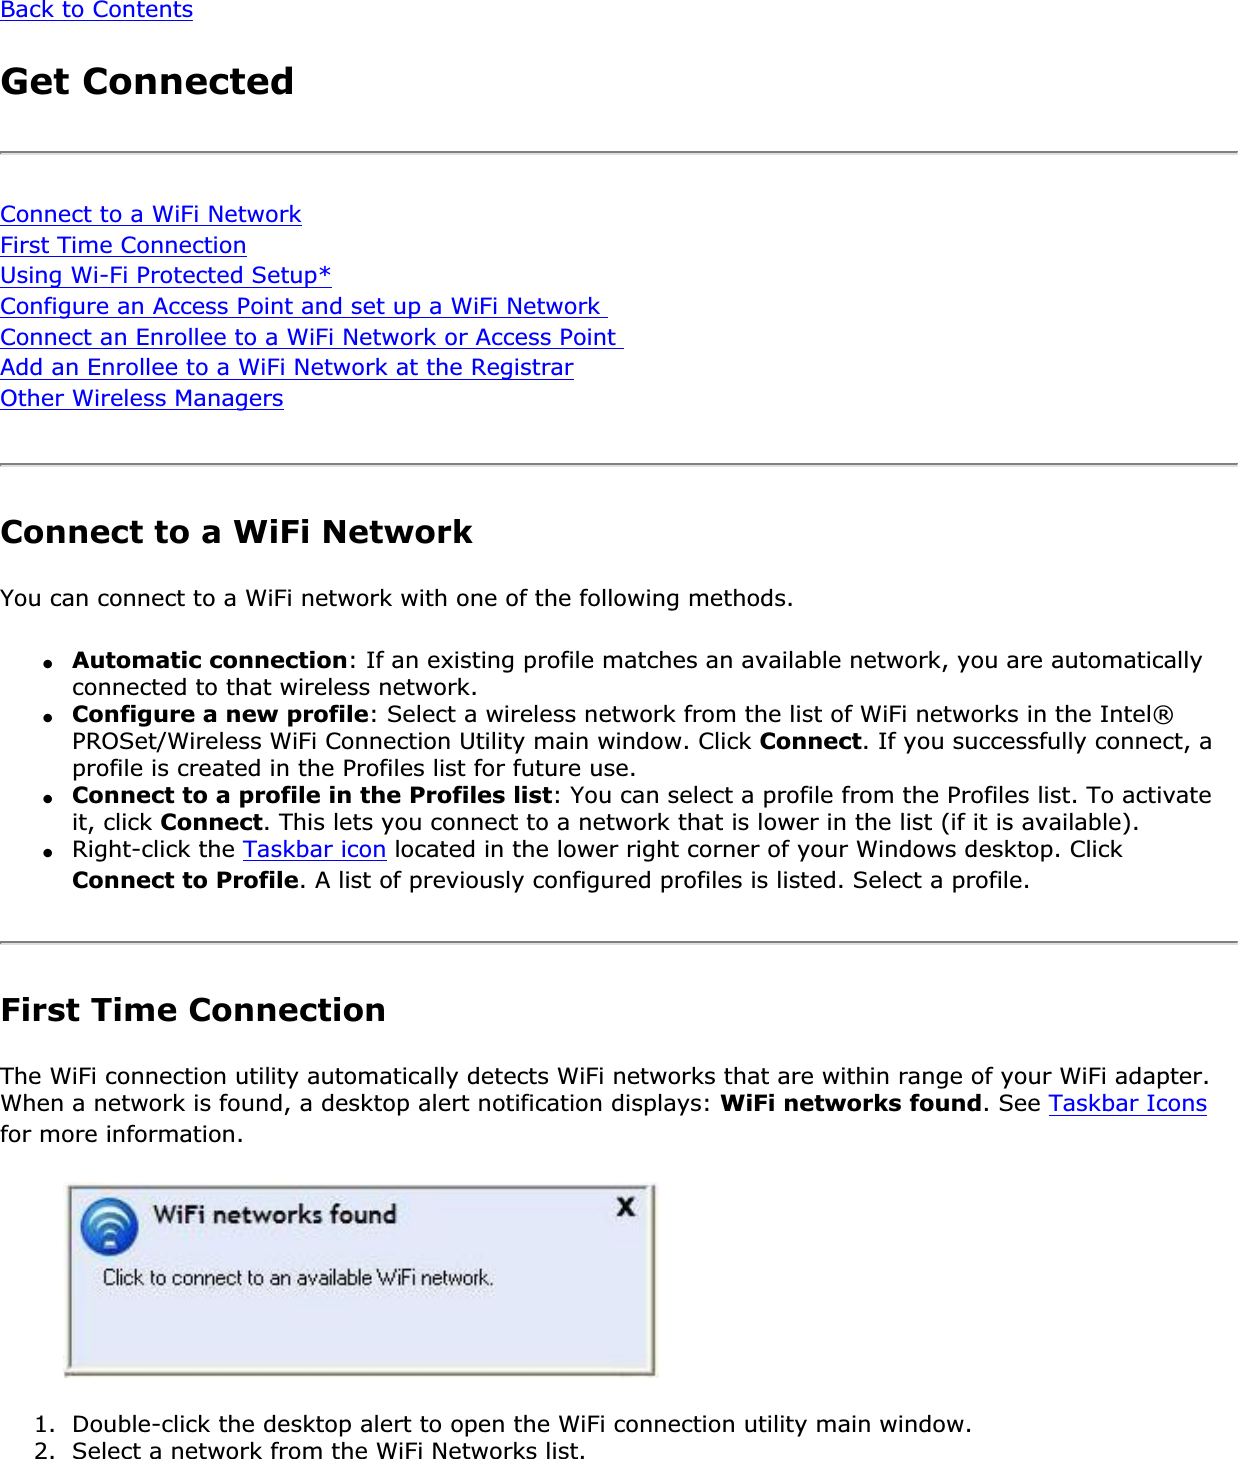 Back to ContentsGet ConnectedConnect to a WiFi NetworkFirst Time ConnectionUsing Wi-Fi Protected Setup*Configure an Access Point and set up a WiFi Network Connect an Enrollee to a WiFi Network or Access Point Add an Enrollee to a WiFi Network at the RegistrarOther Wireless ManagersConnect to a WiFi NetworkYou can connect to a WiFi network with one of the following methods.●Automatic connection: If an existing profile matches an available network, you are automatically connected to that wireless network.●Configure a new profile: Select a wireless network from the list of WiFi networks in the Intel® PROSet/Wireless WiFi Connection Utility main window. Click Connect. If you successfully connect, a profile is created in the Profiles list for future use.●Connect to a profile in the Profiles list: You can select a profile from the Profiles list. To activate it, click Connect. This lets you connect to a network that is lower in the list (if it is available).●Right-click the Taskbar icon located in the lower right corner of your Windows desktop. Click Connect to Profile. A list of previously configured profiles is listed. Select a profile.First Time ConnectionThe WiFi connection utility automatically detects WiFi networks that are within range of your WiFi adapter. When a network is found, a desktop alert notification displays: WiFi networks found. See Taskbar Iconsfor more information.1. Double-click the desktop alert to open the WiFi connection utility main window.2. Select a network from the WiFi Networks list.